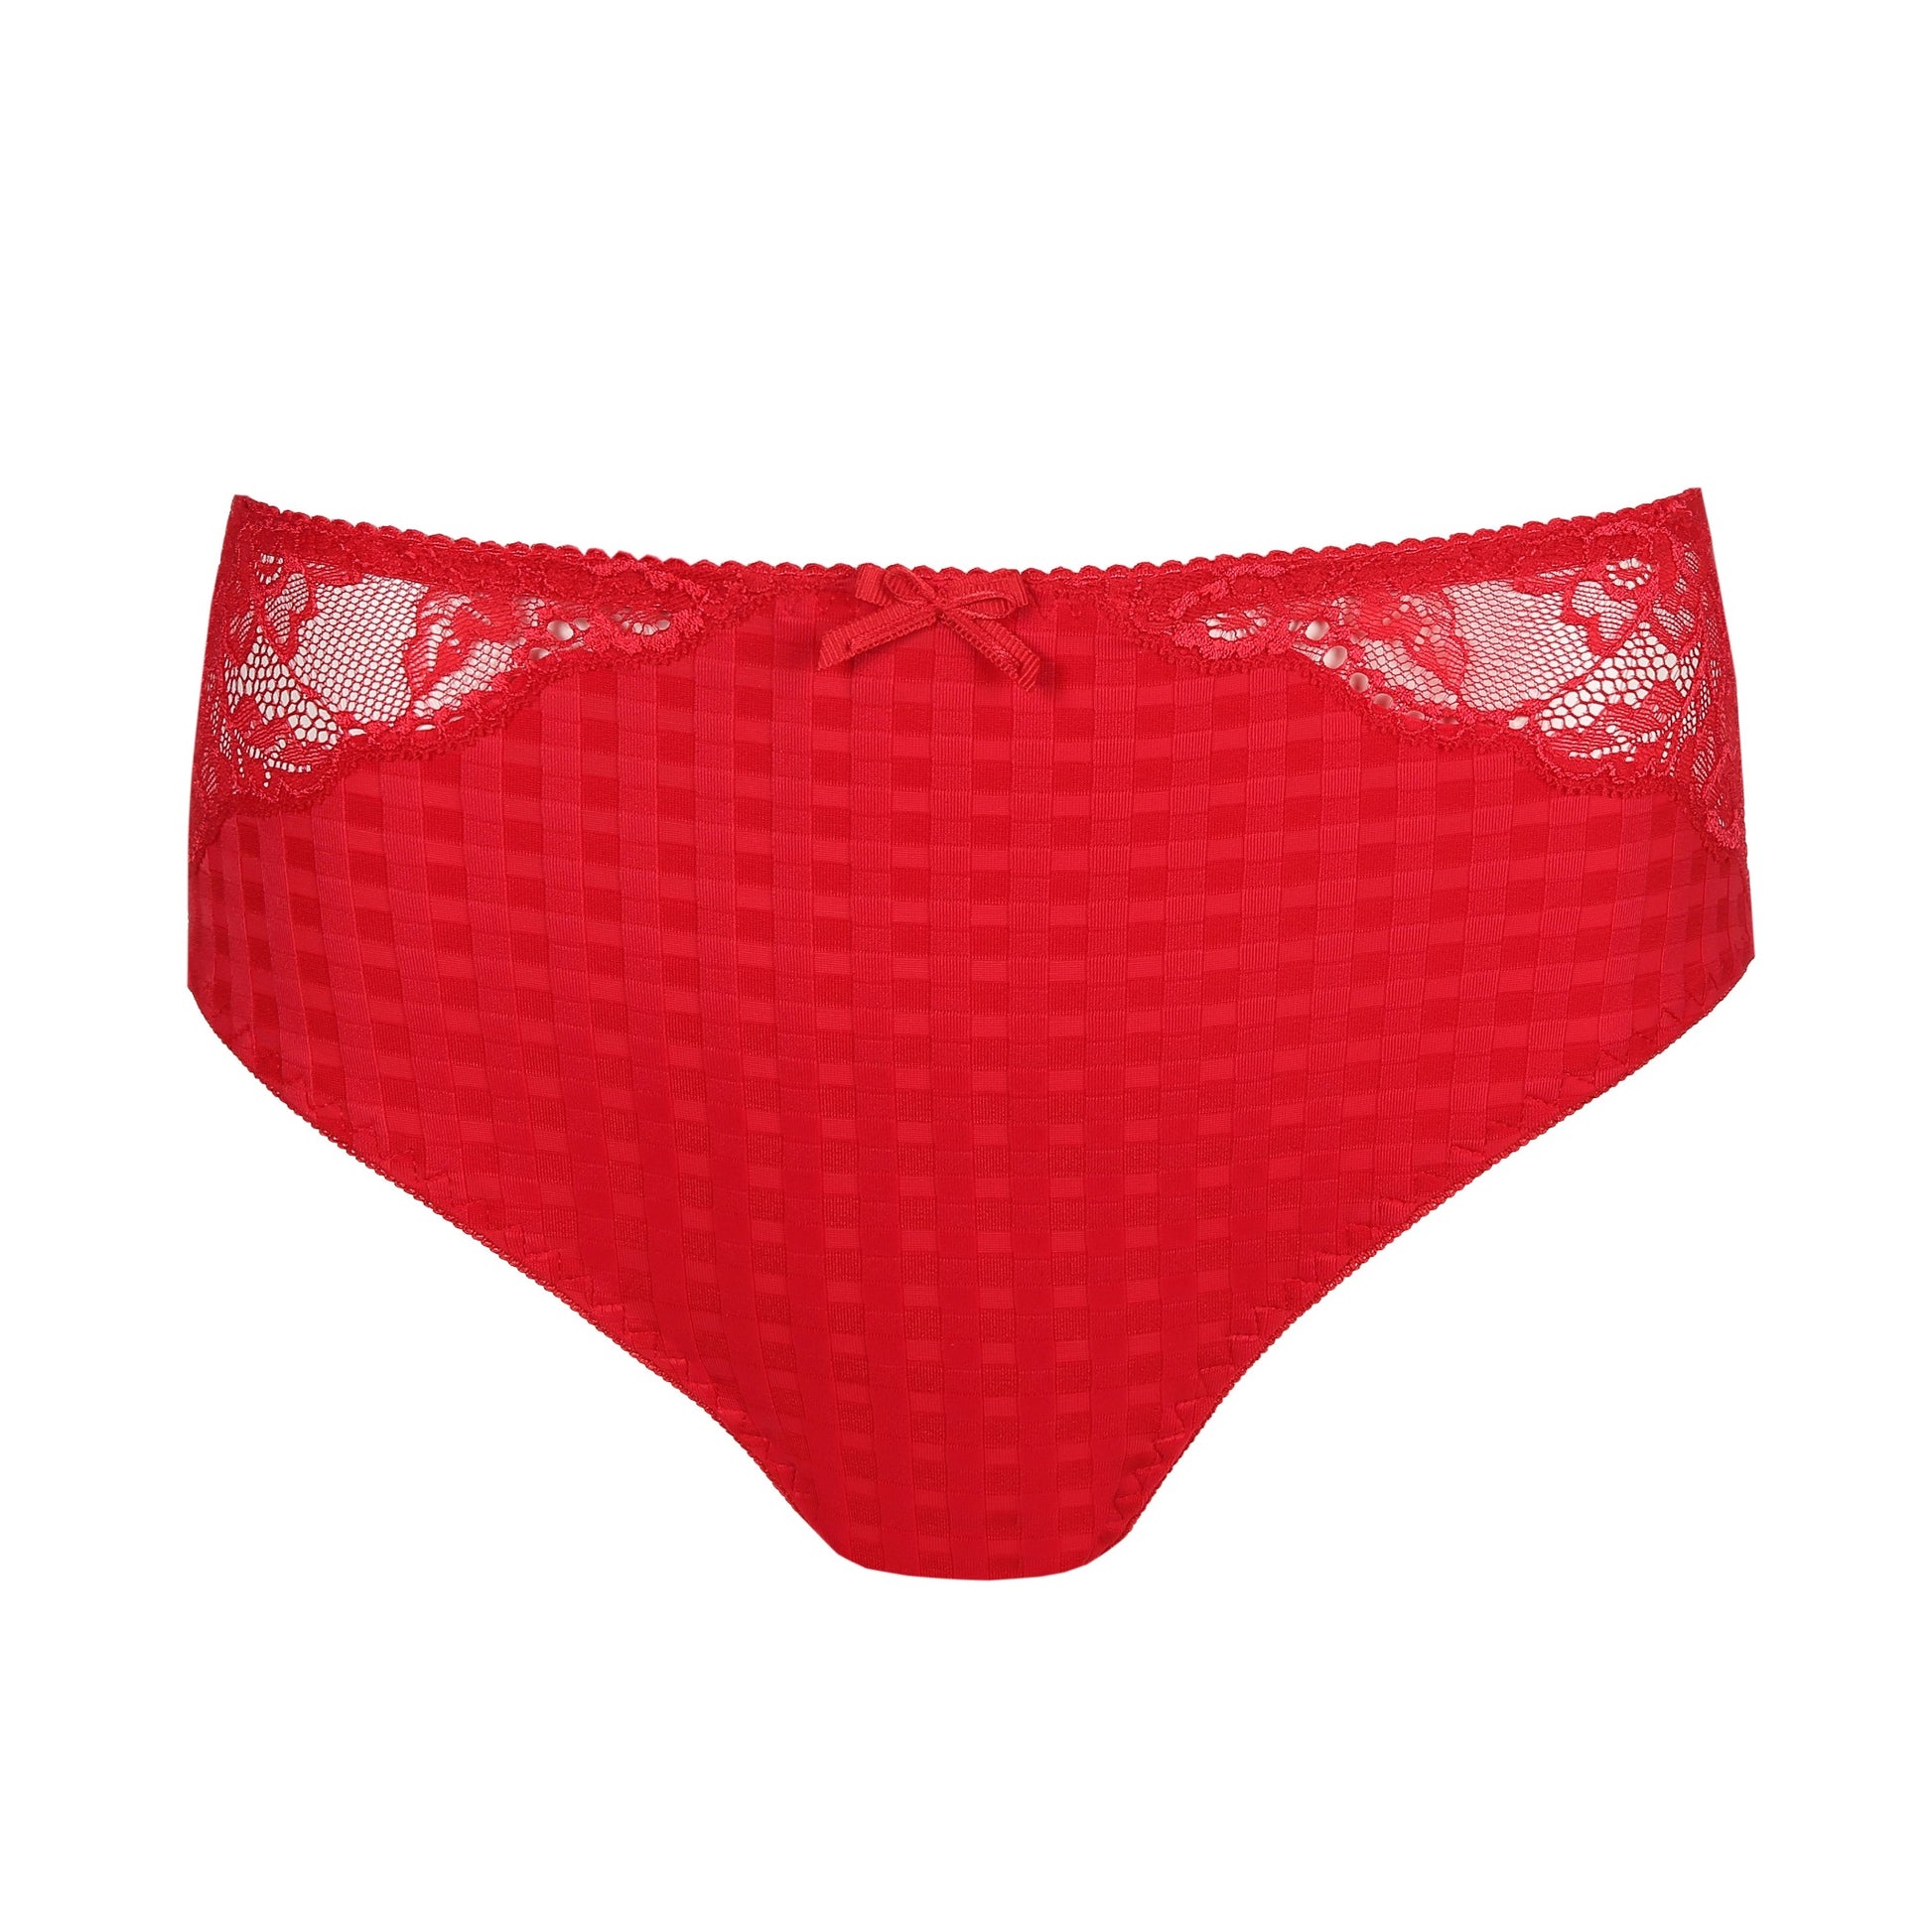 Madison Full Brief panty with lace in Scarlet by PrimaDonna.